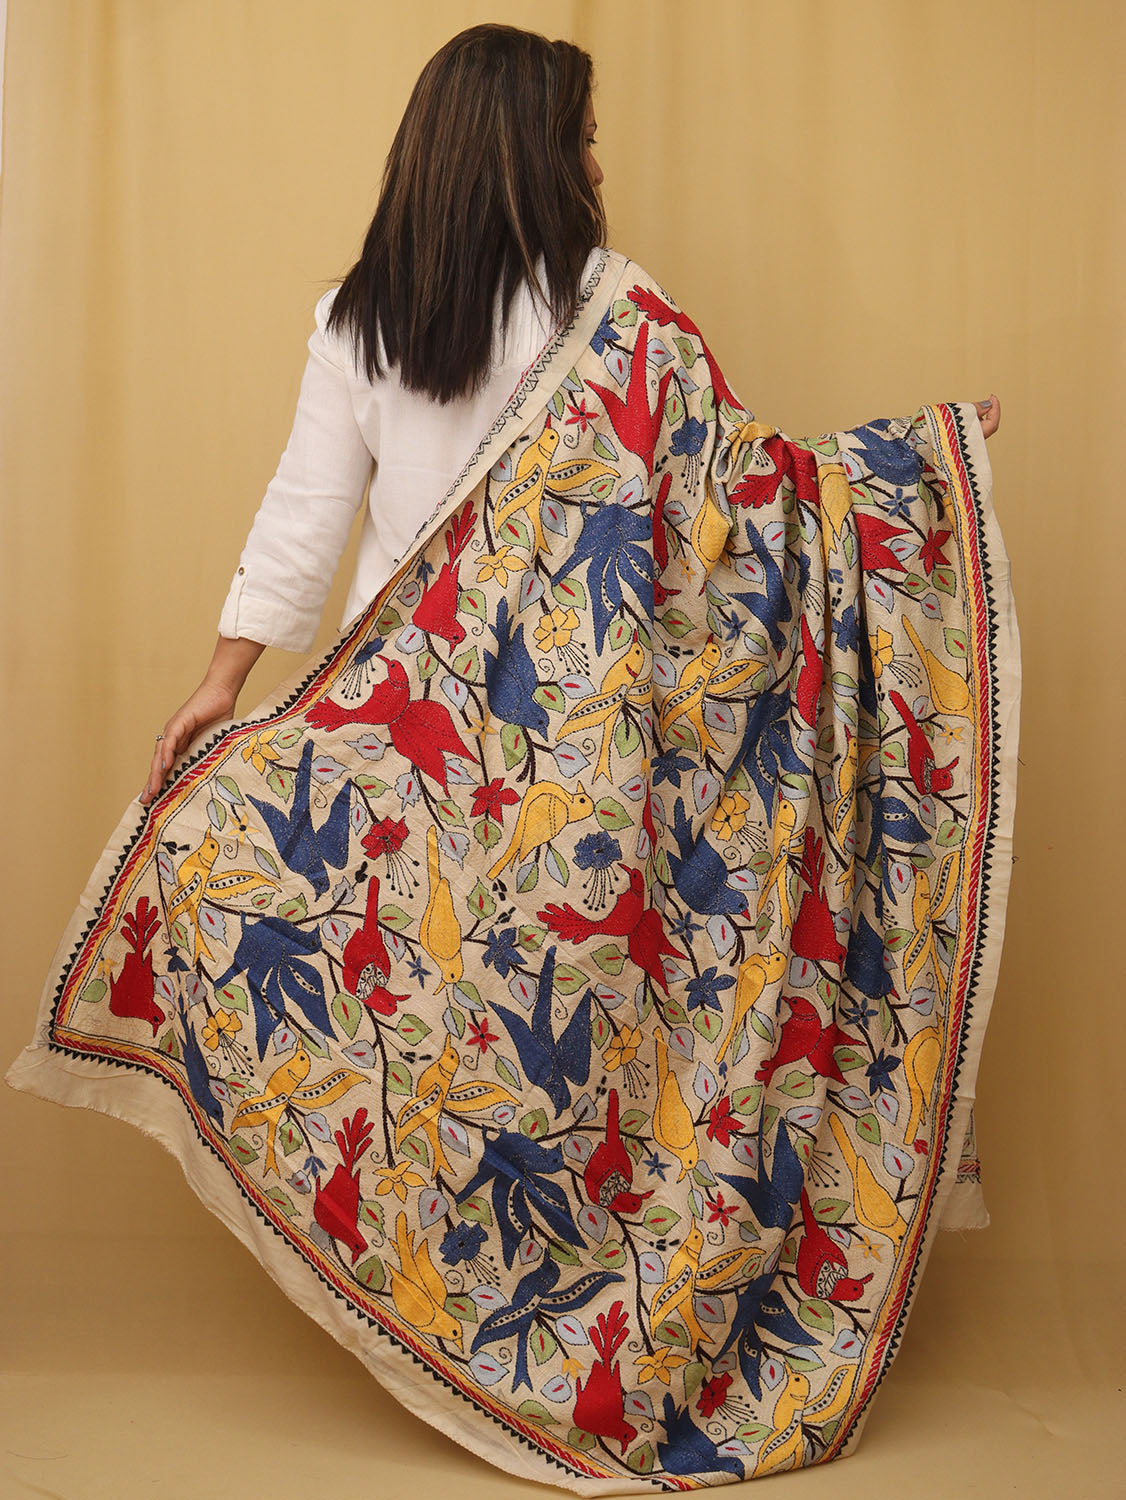 Stunning Multicolor Kantha Tussar Silk Dupatta with Hand Embroidered Bird and Floral Design